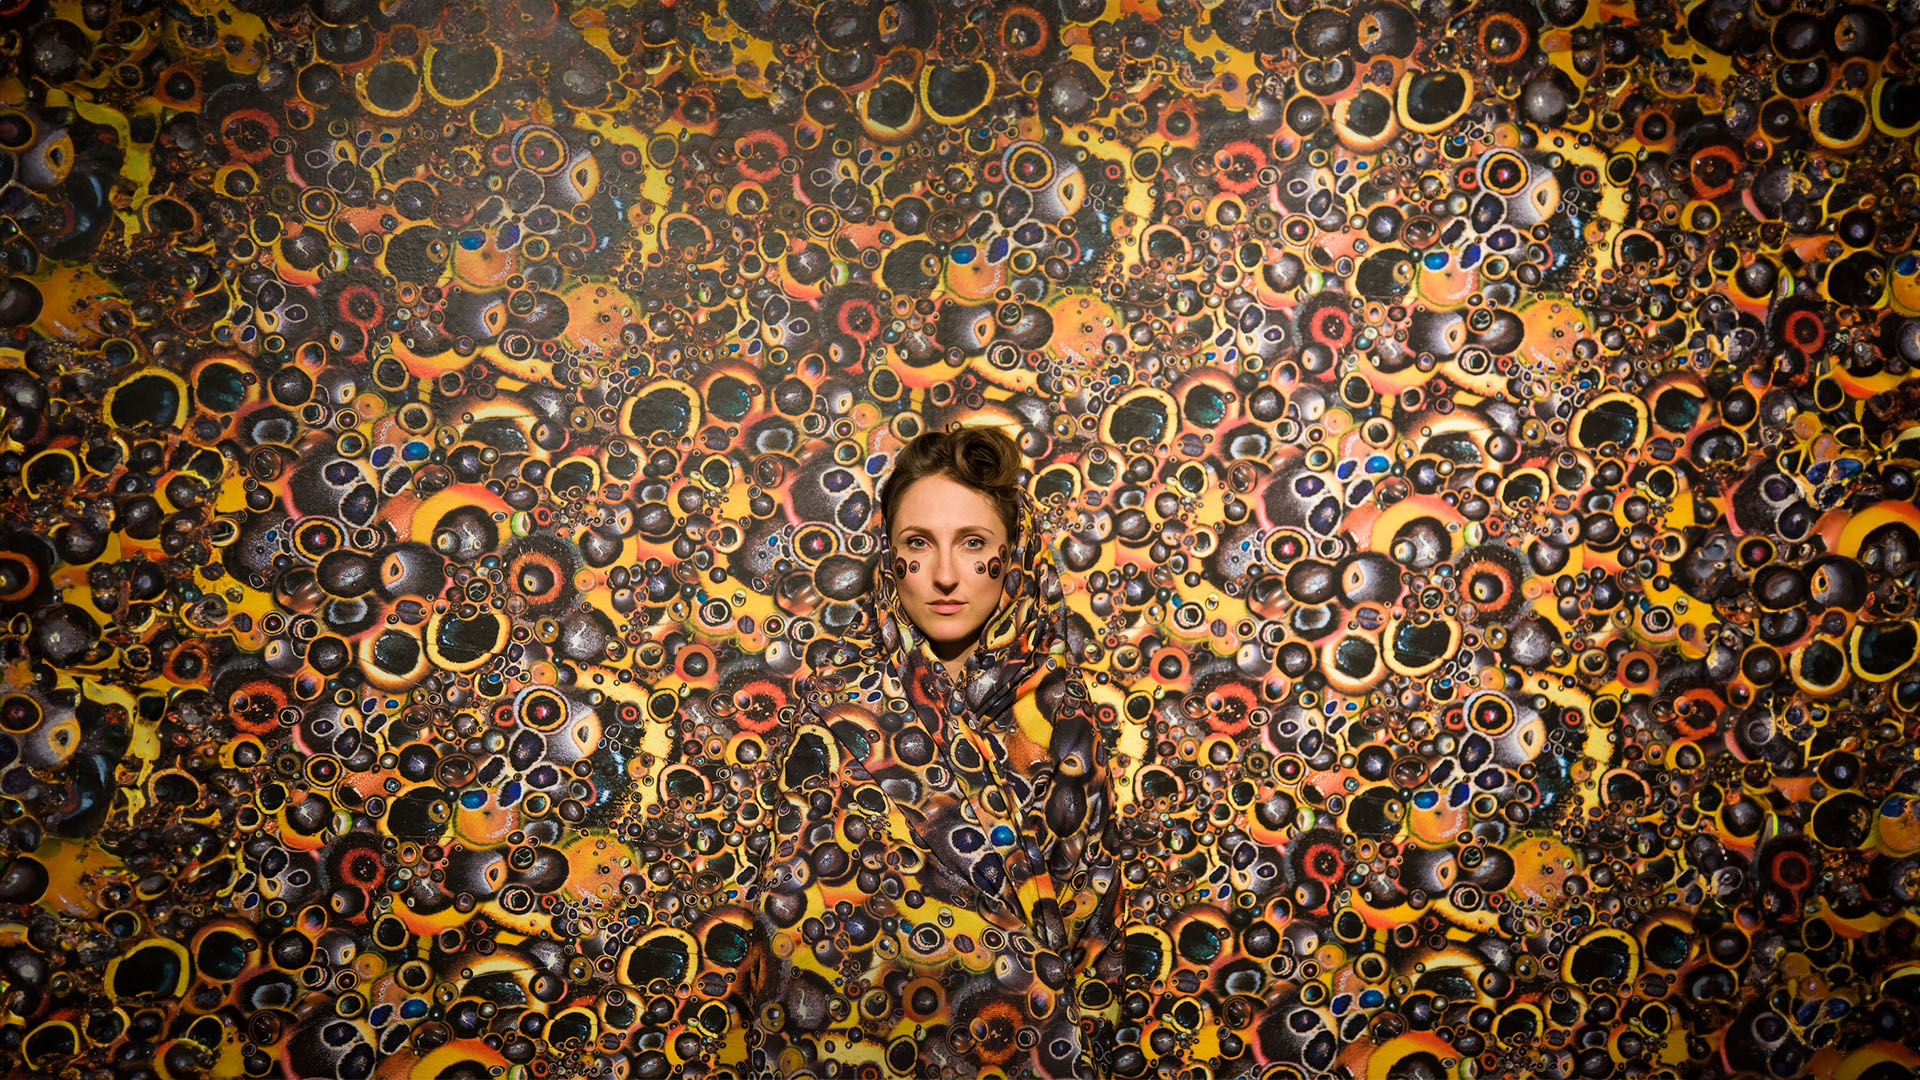 A person draped in a orange, yellow, and black patterned fabric, standing in front of a wall covered in the same pattern.